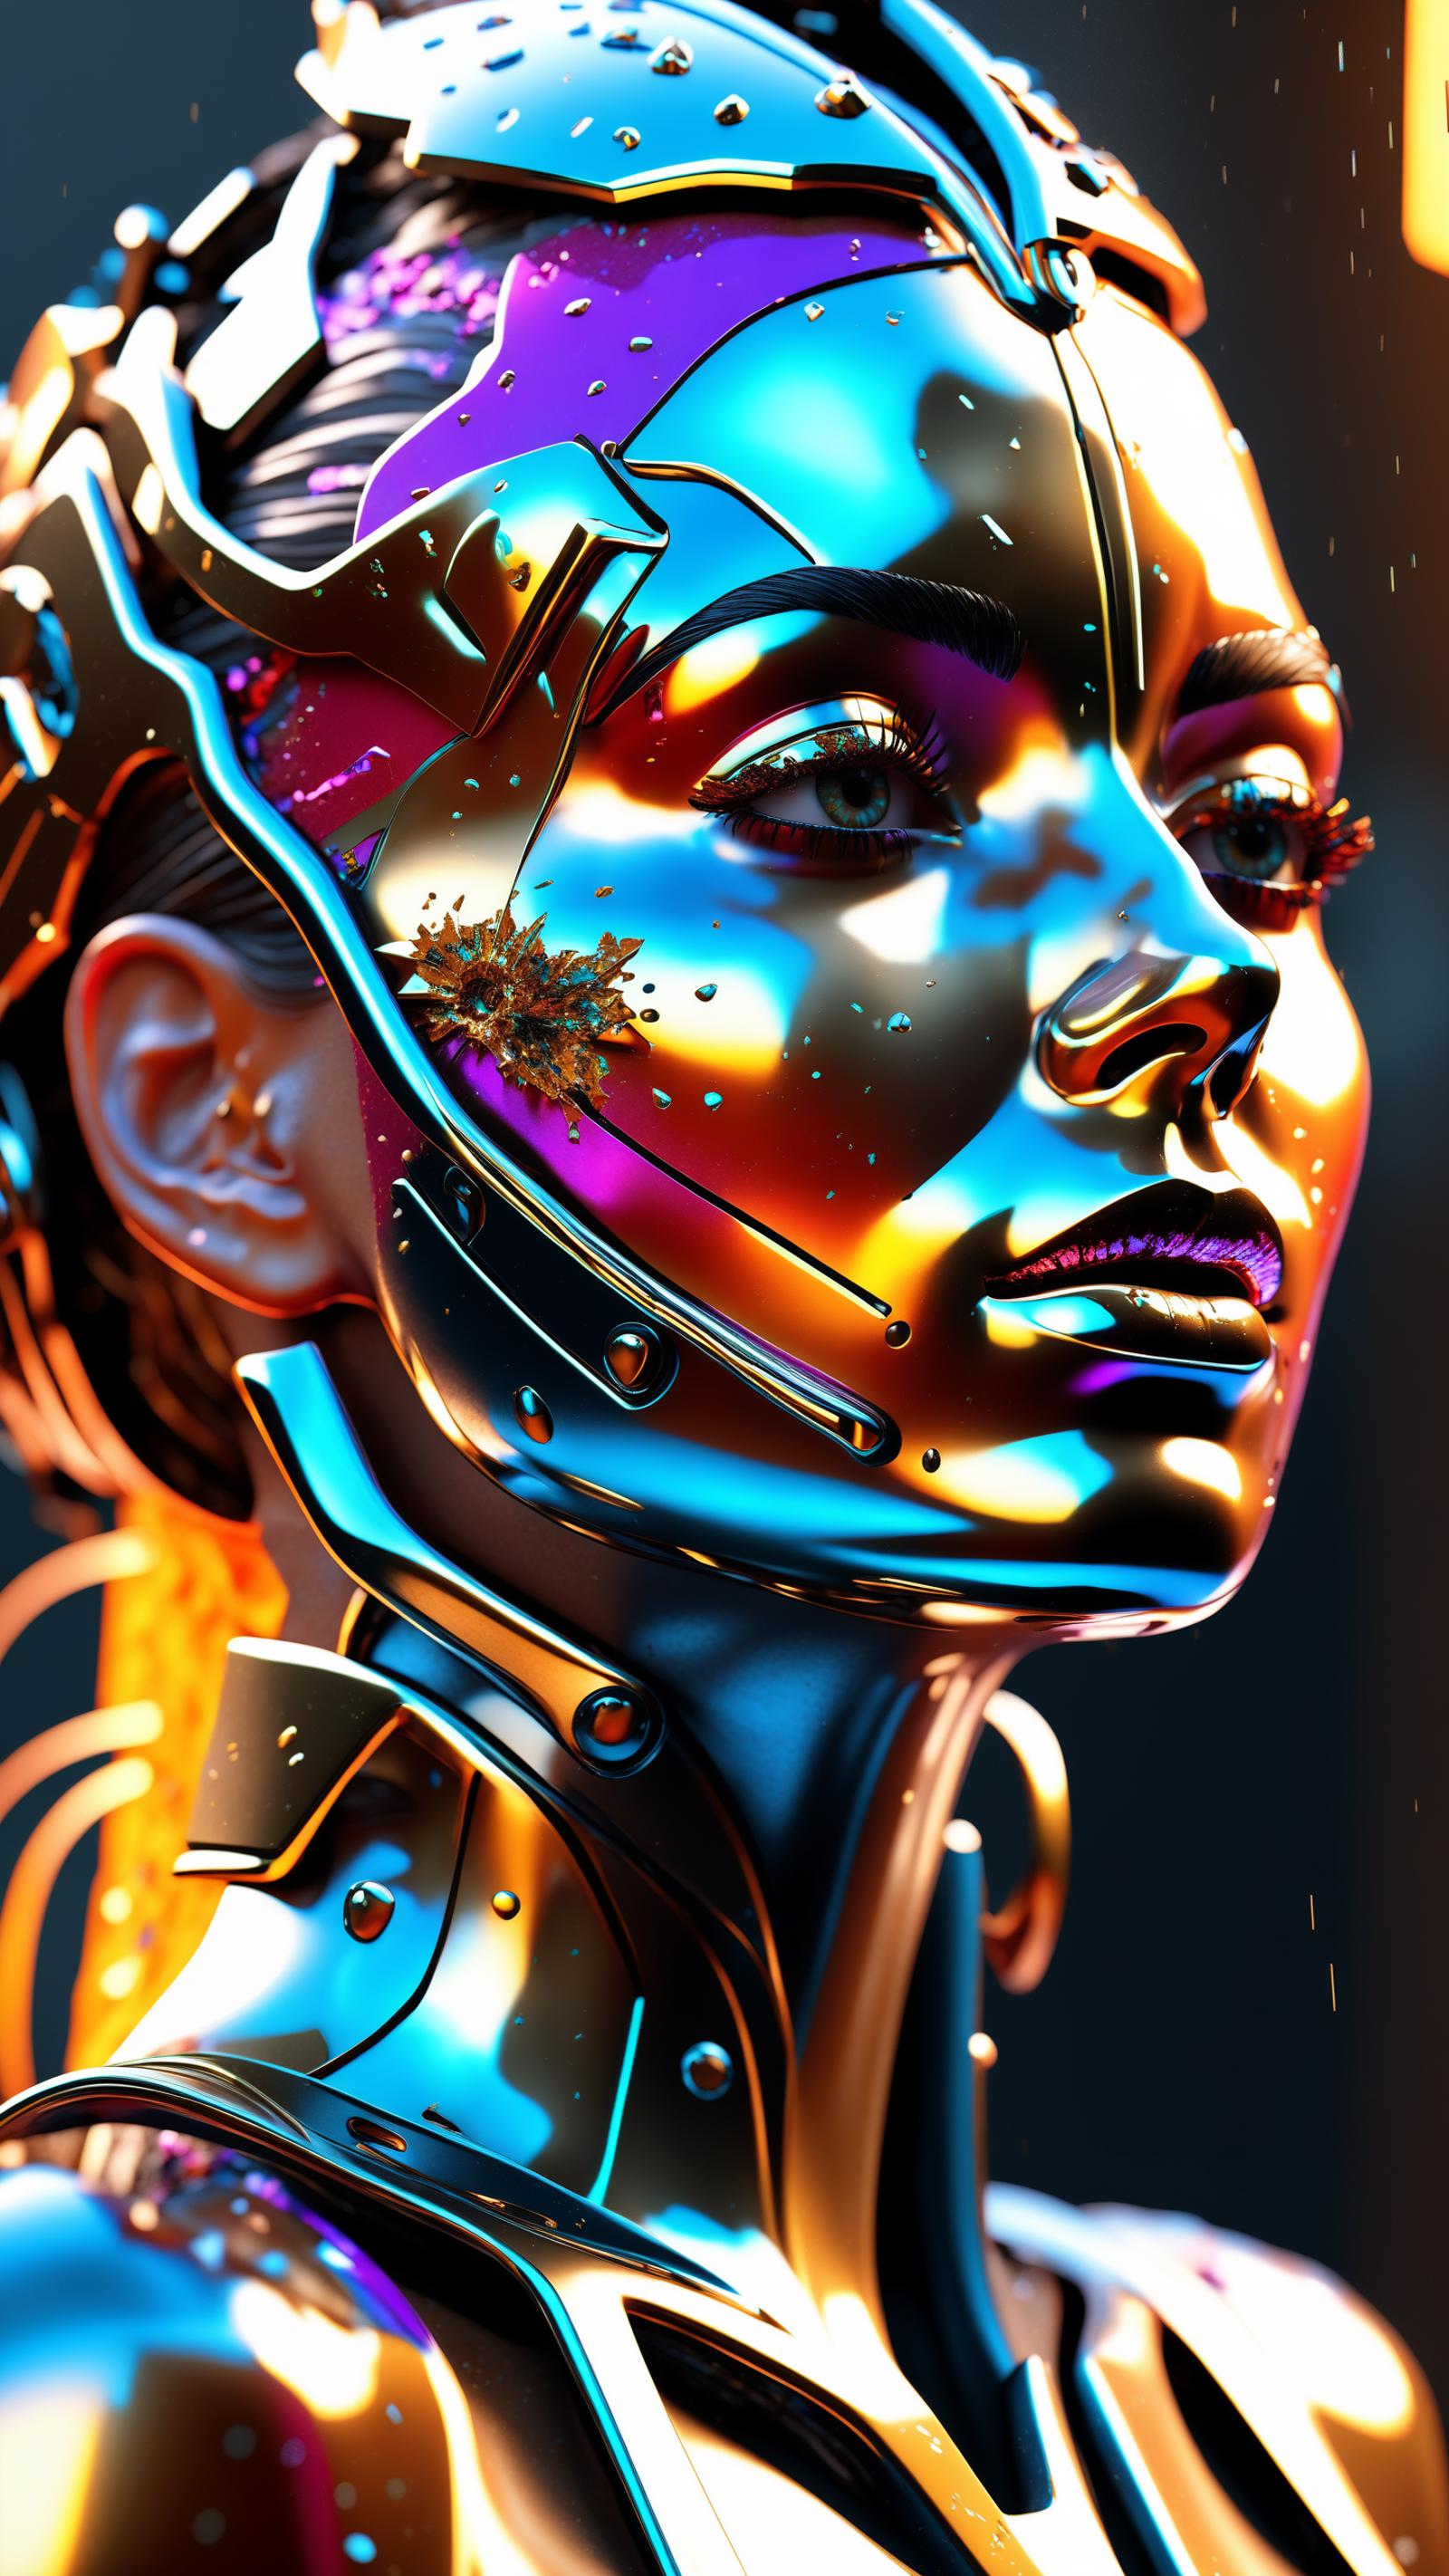 A 3D Rendering of a Woman with a Futuristic, Cyberpunk-Themed Face Mask